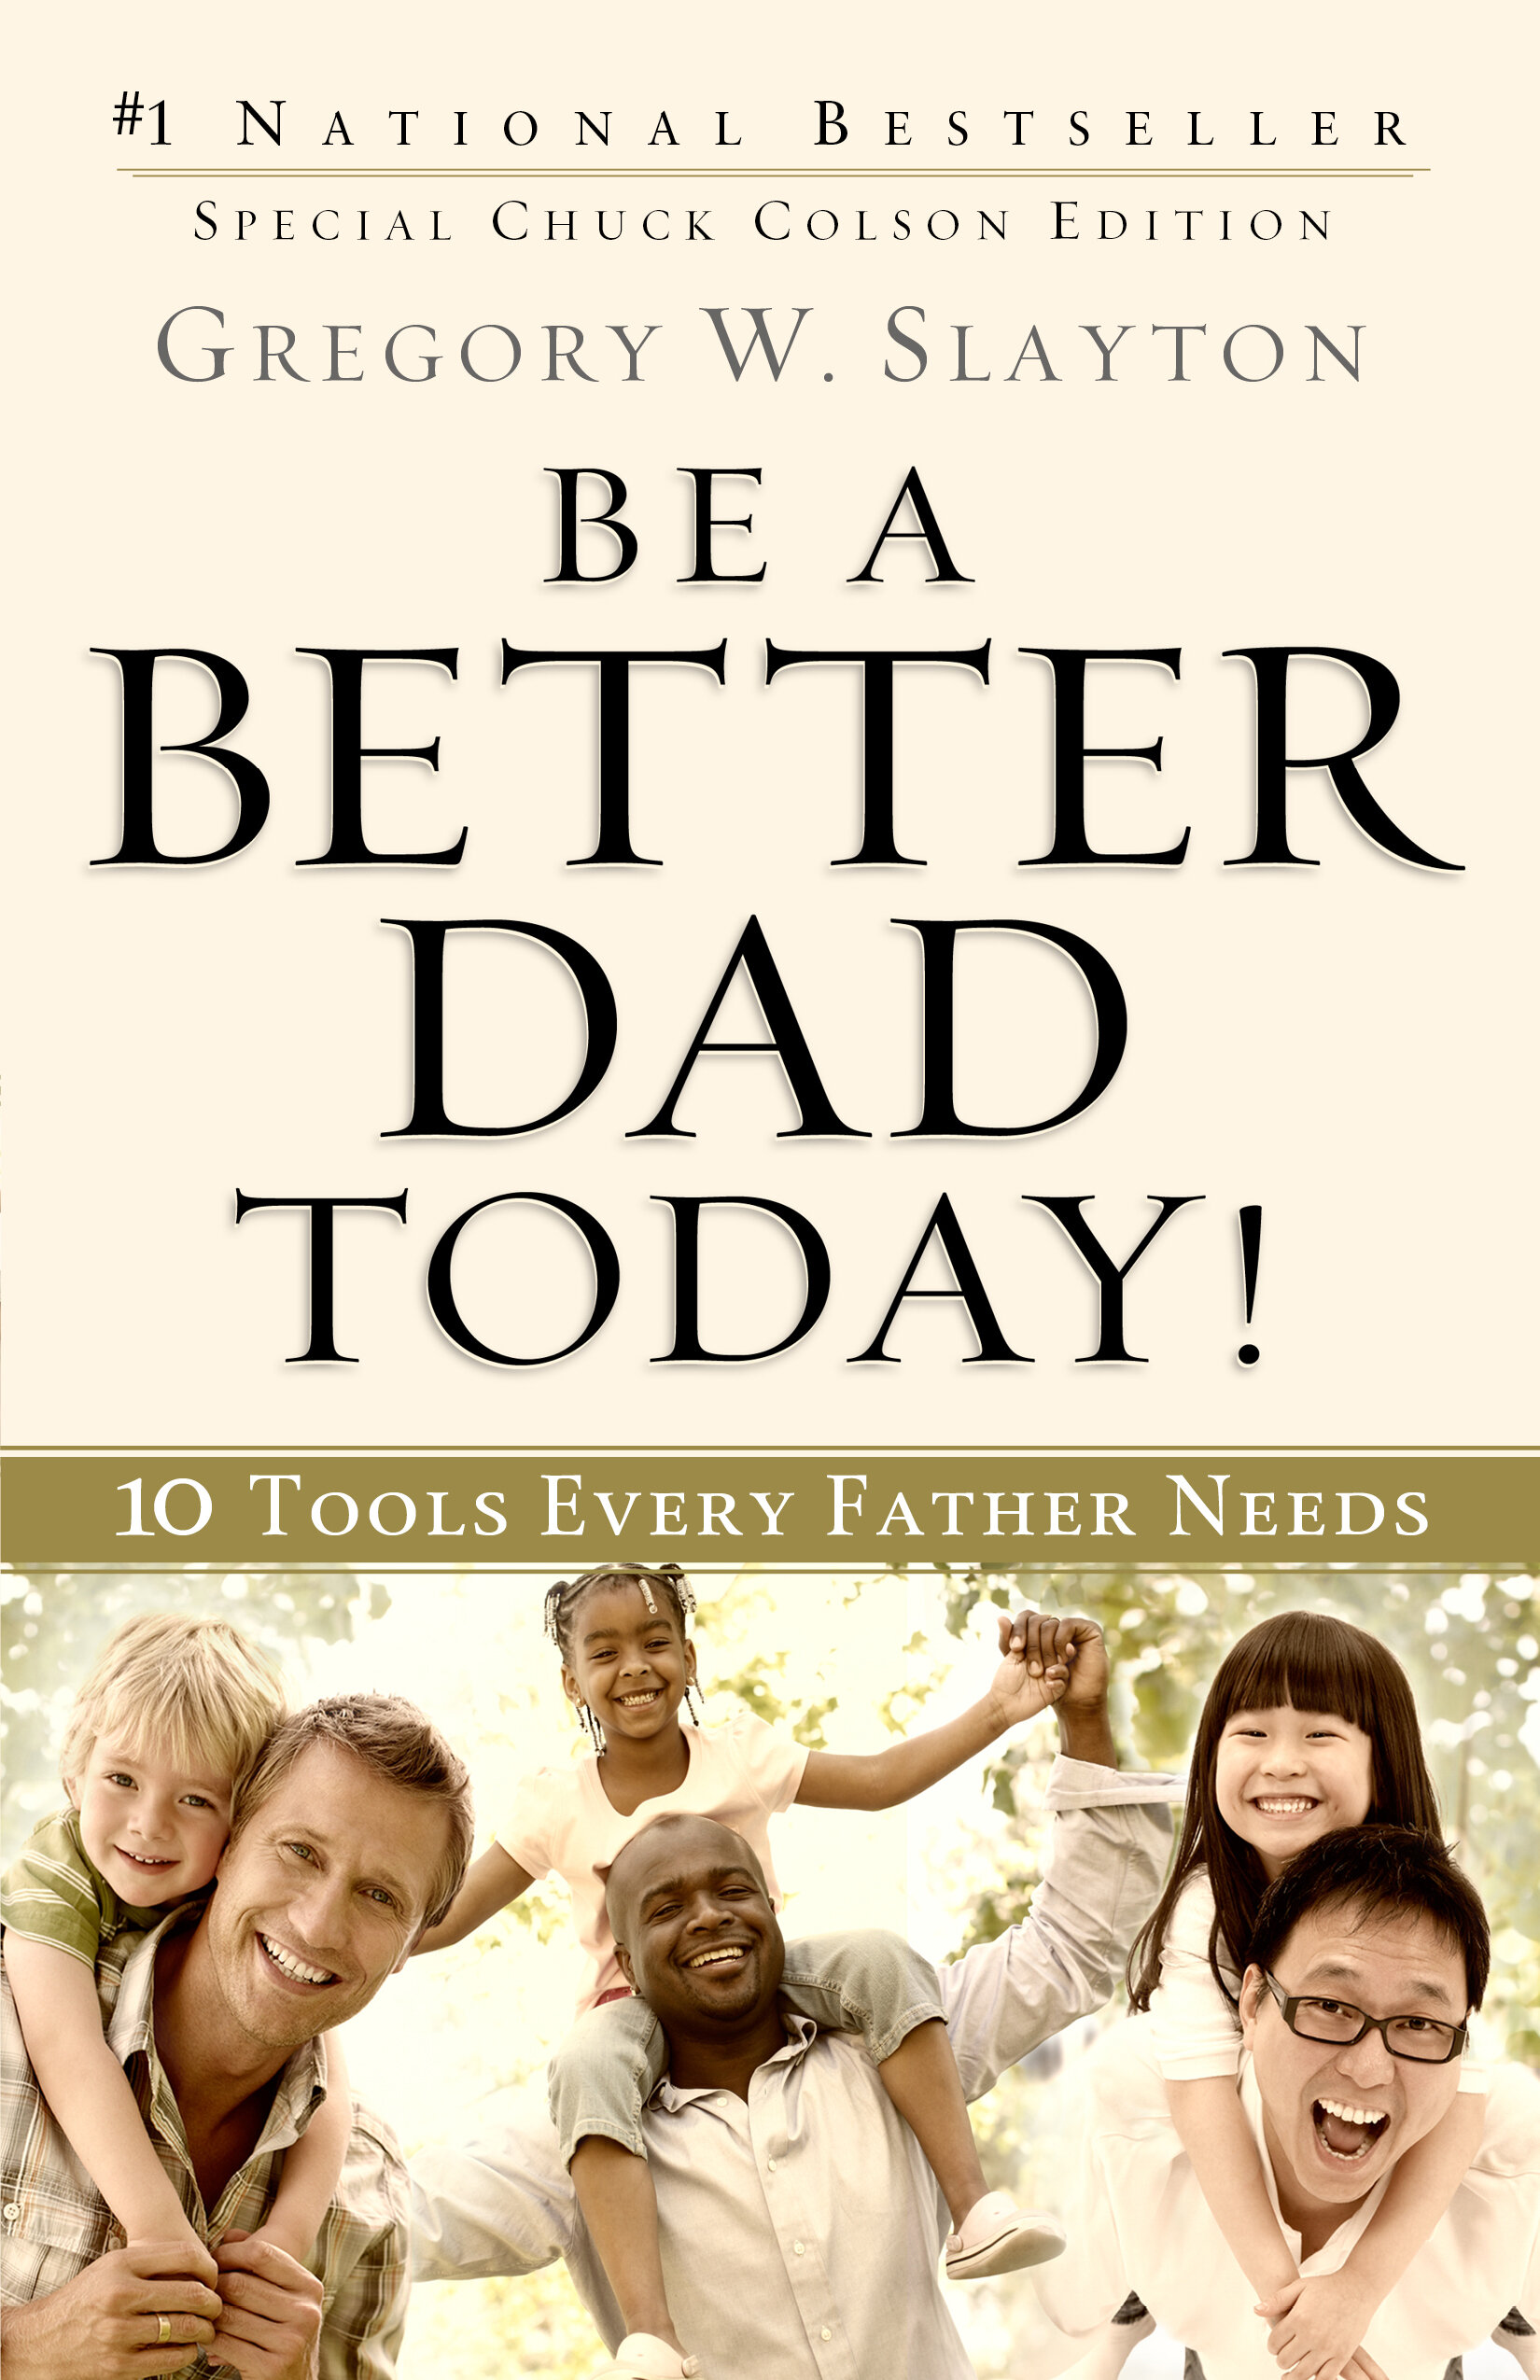 Be a Better Dad Today! 10 Tools Every Father Needs